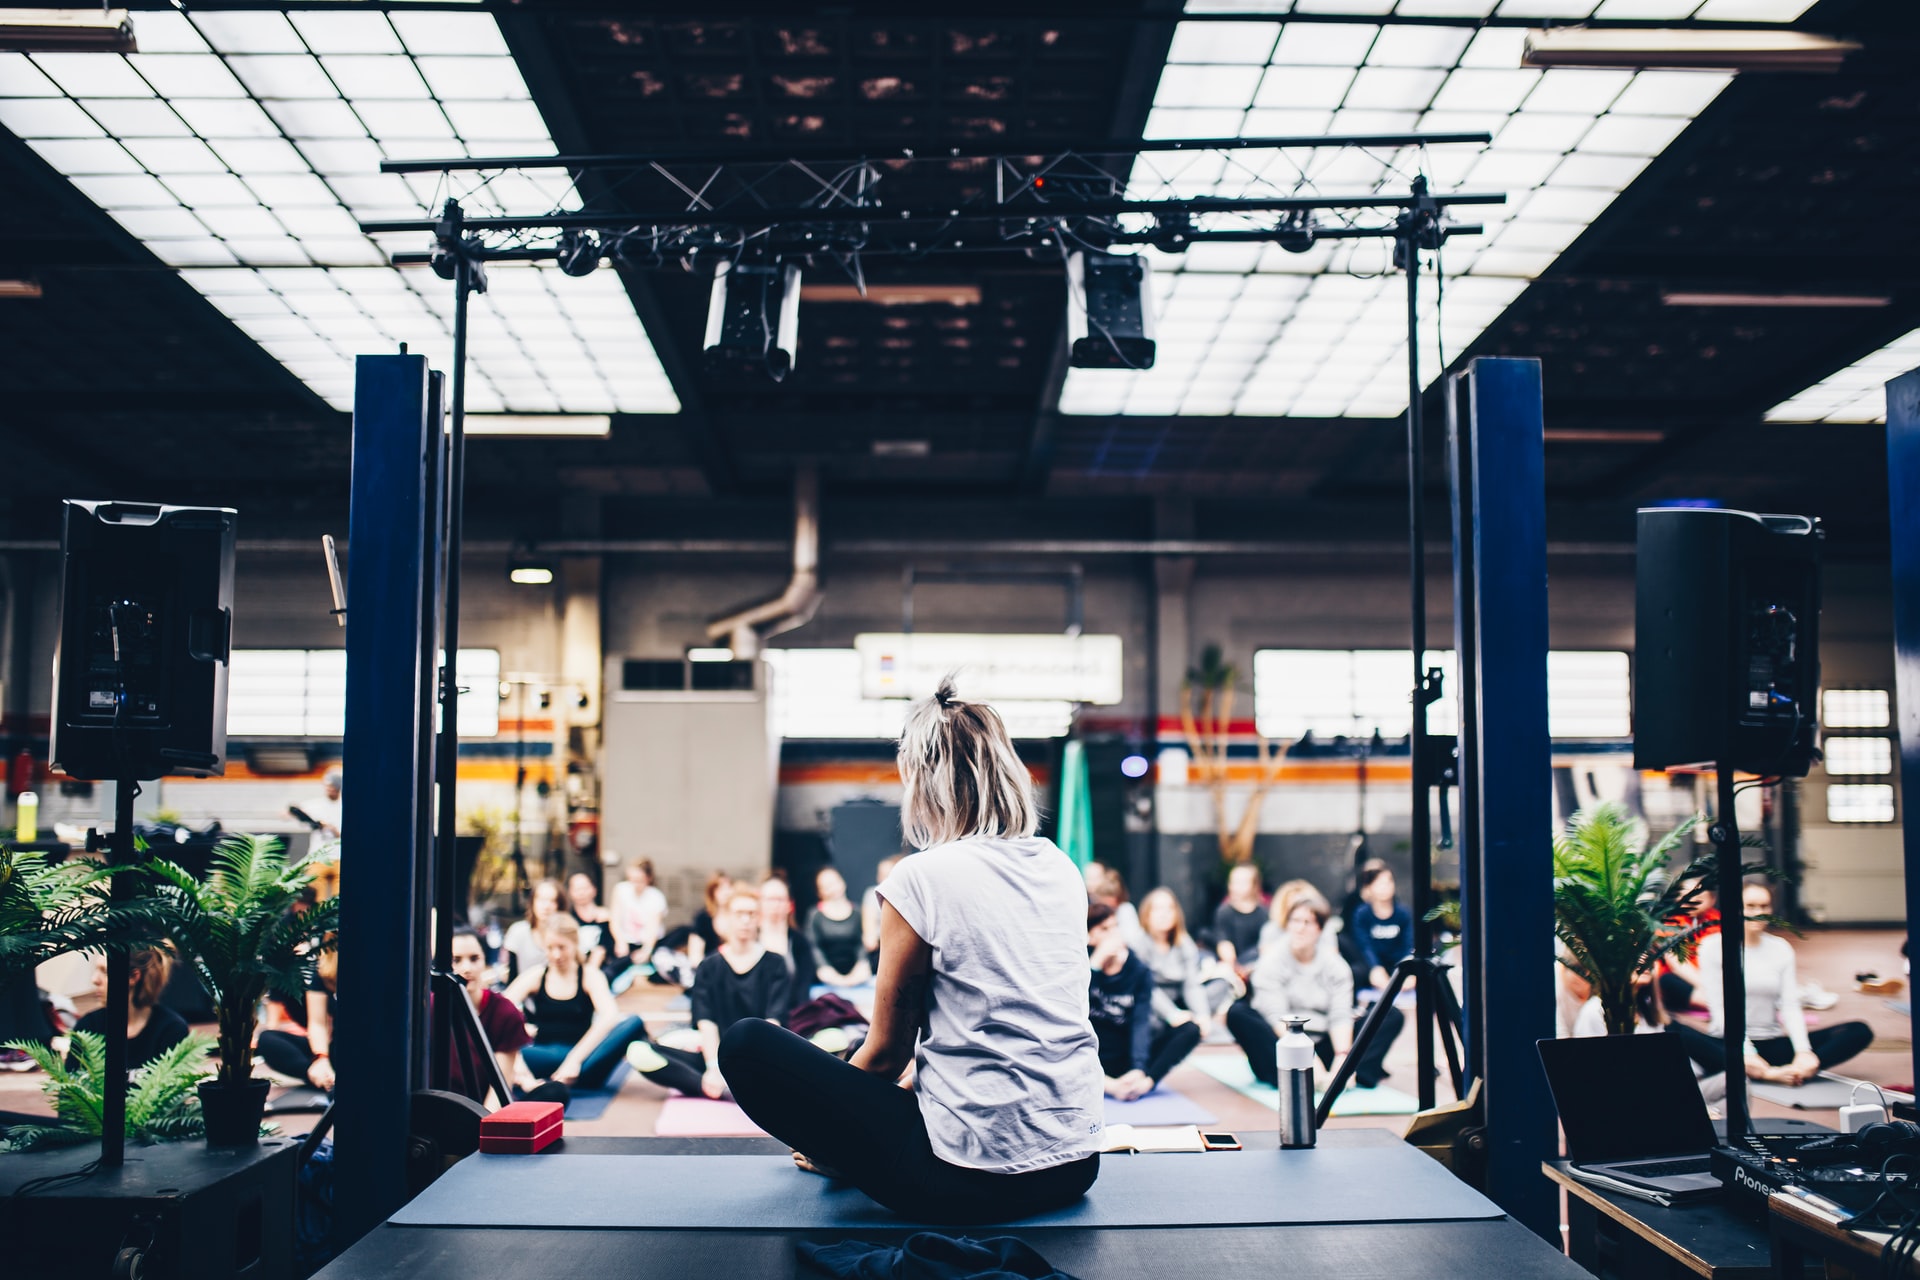 Woman delivering an event to people on yoga mats